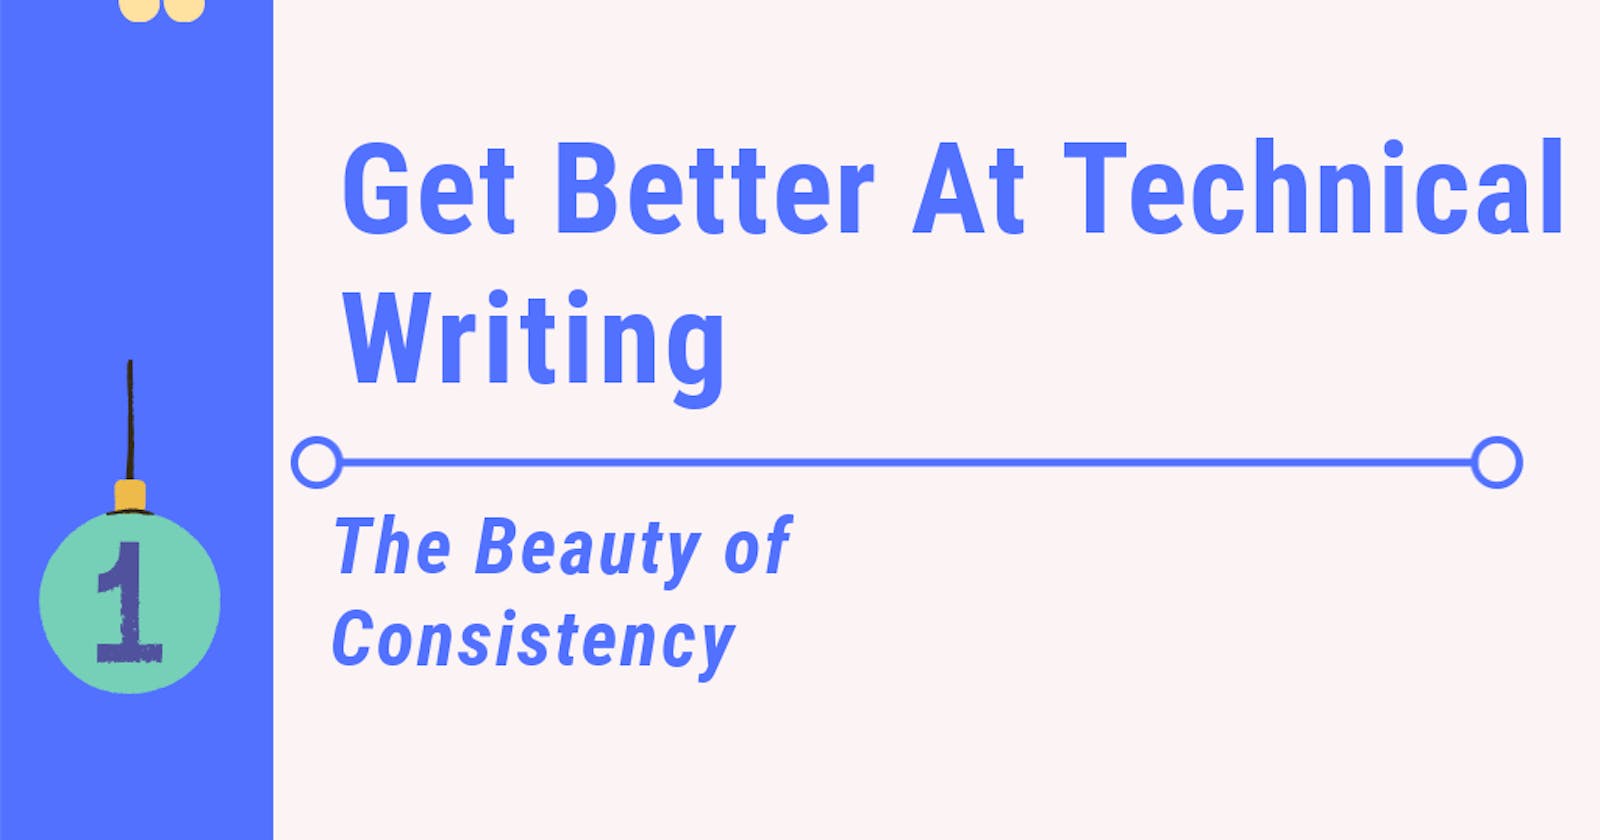 Get Better At Technical Writing: The Beauty of Consistency